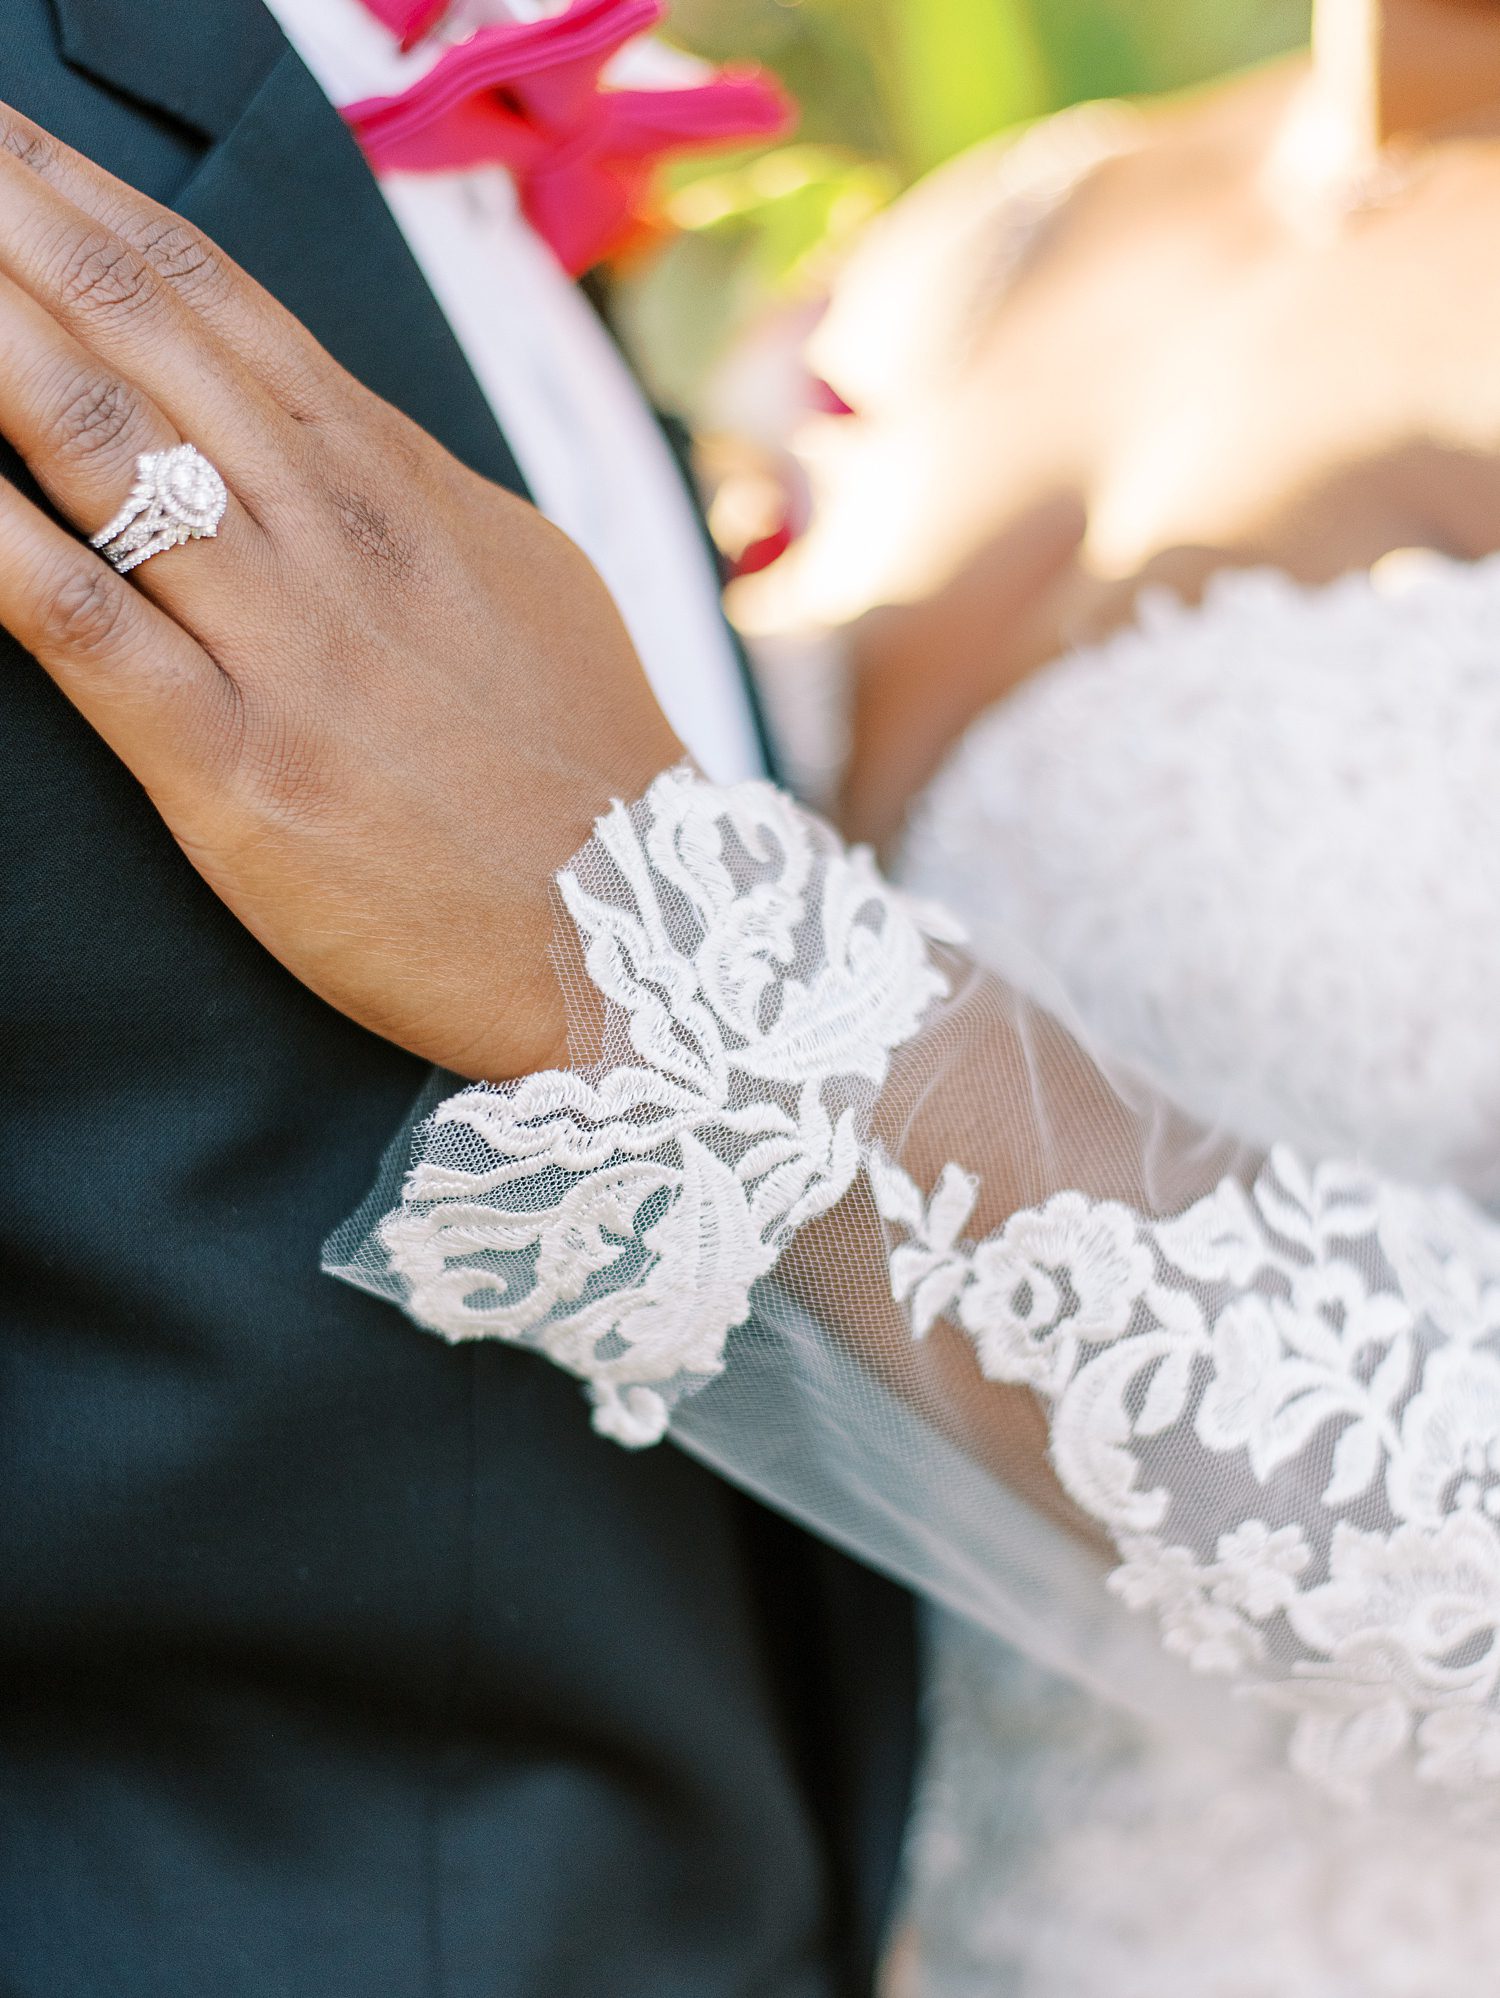 bride shows off engagement ring and lace of wedding dress sleeve on groom's chest